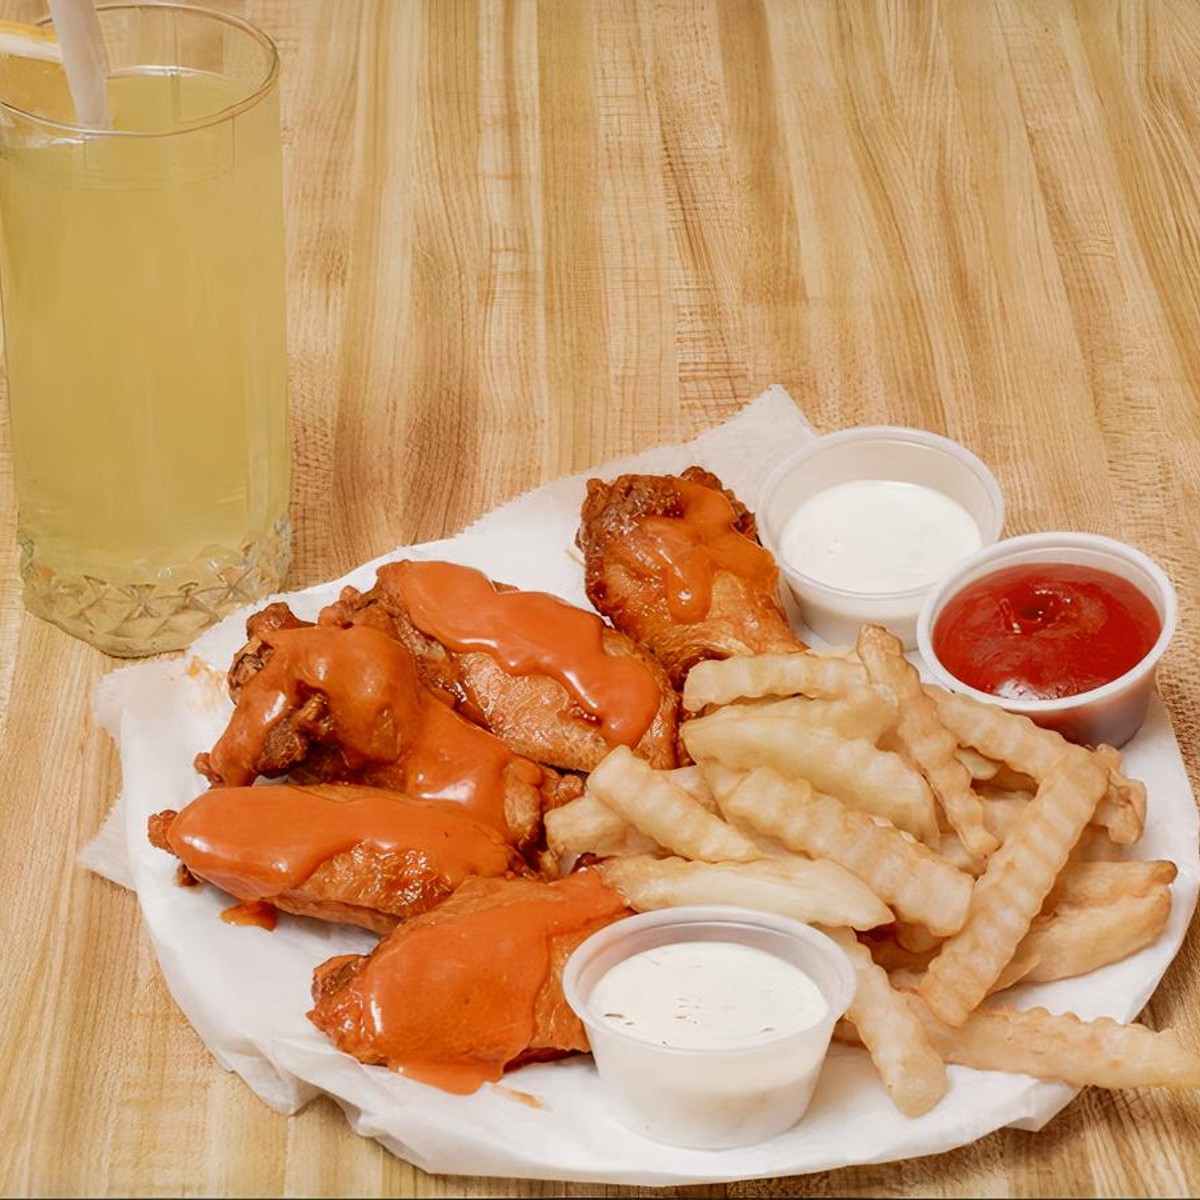 10 piece wing combo with half in hot and half in mild. Home cut fries and  drink included - Picture of Wingstop, Fort Payne - Tripadvisor